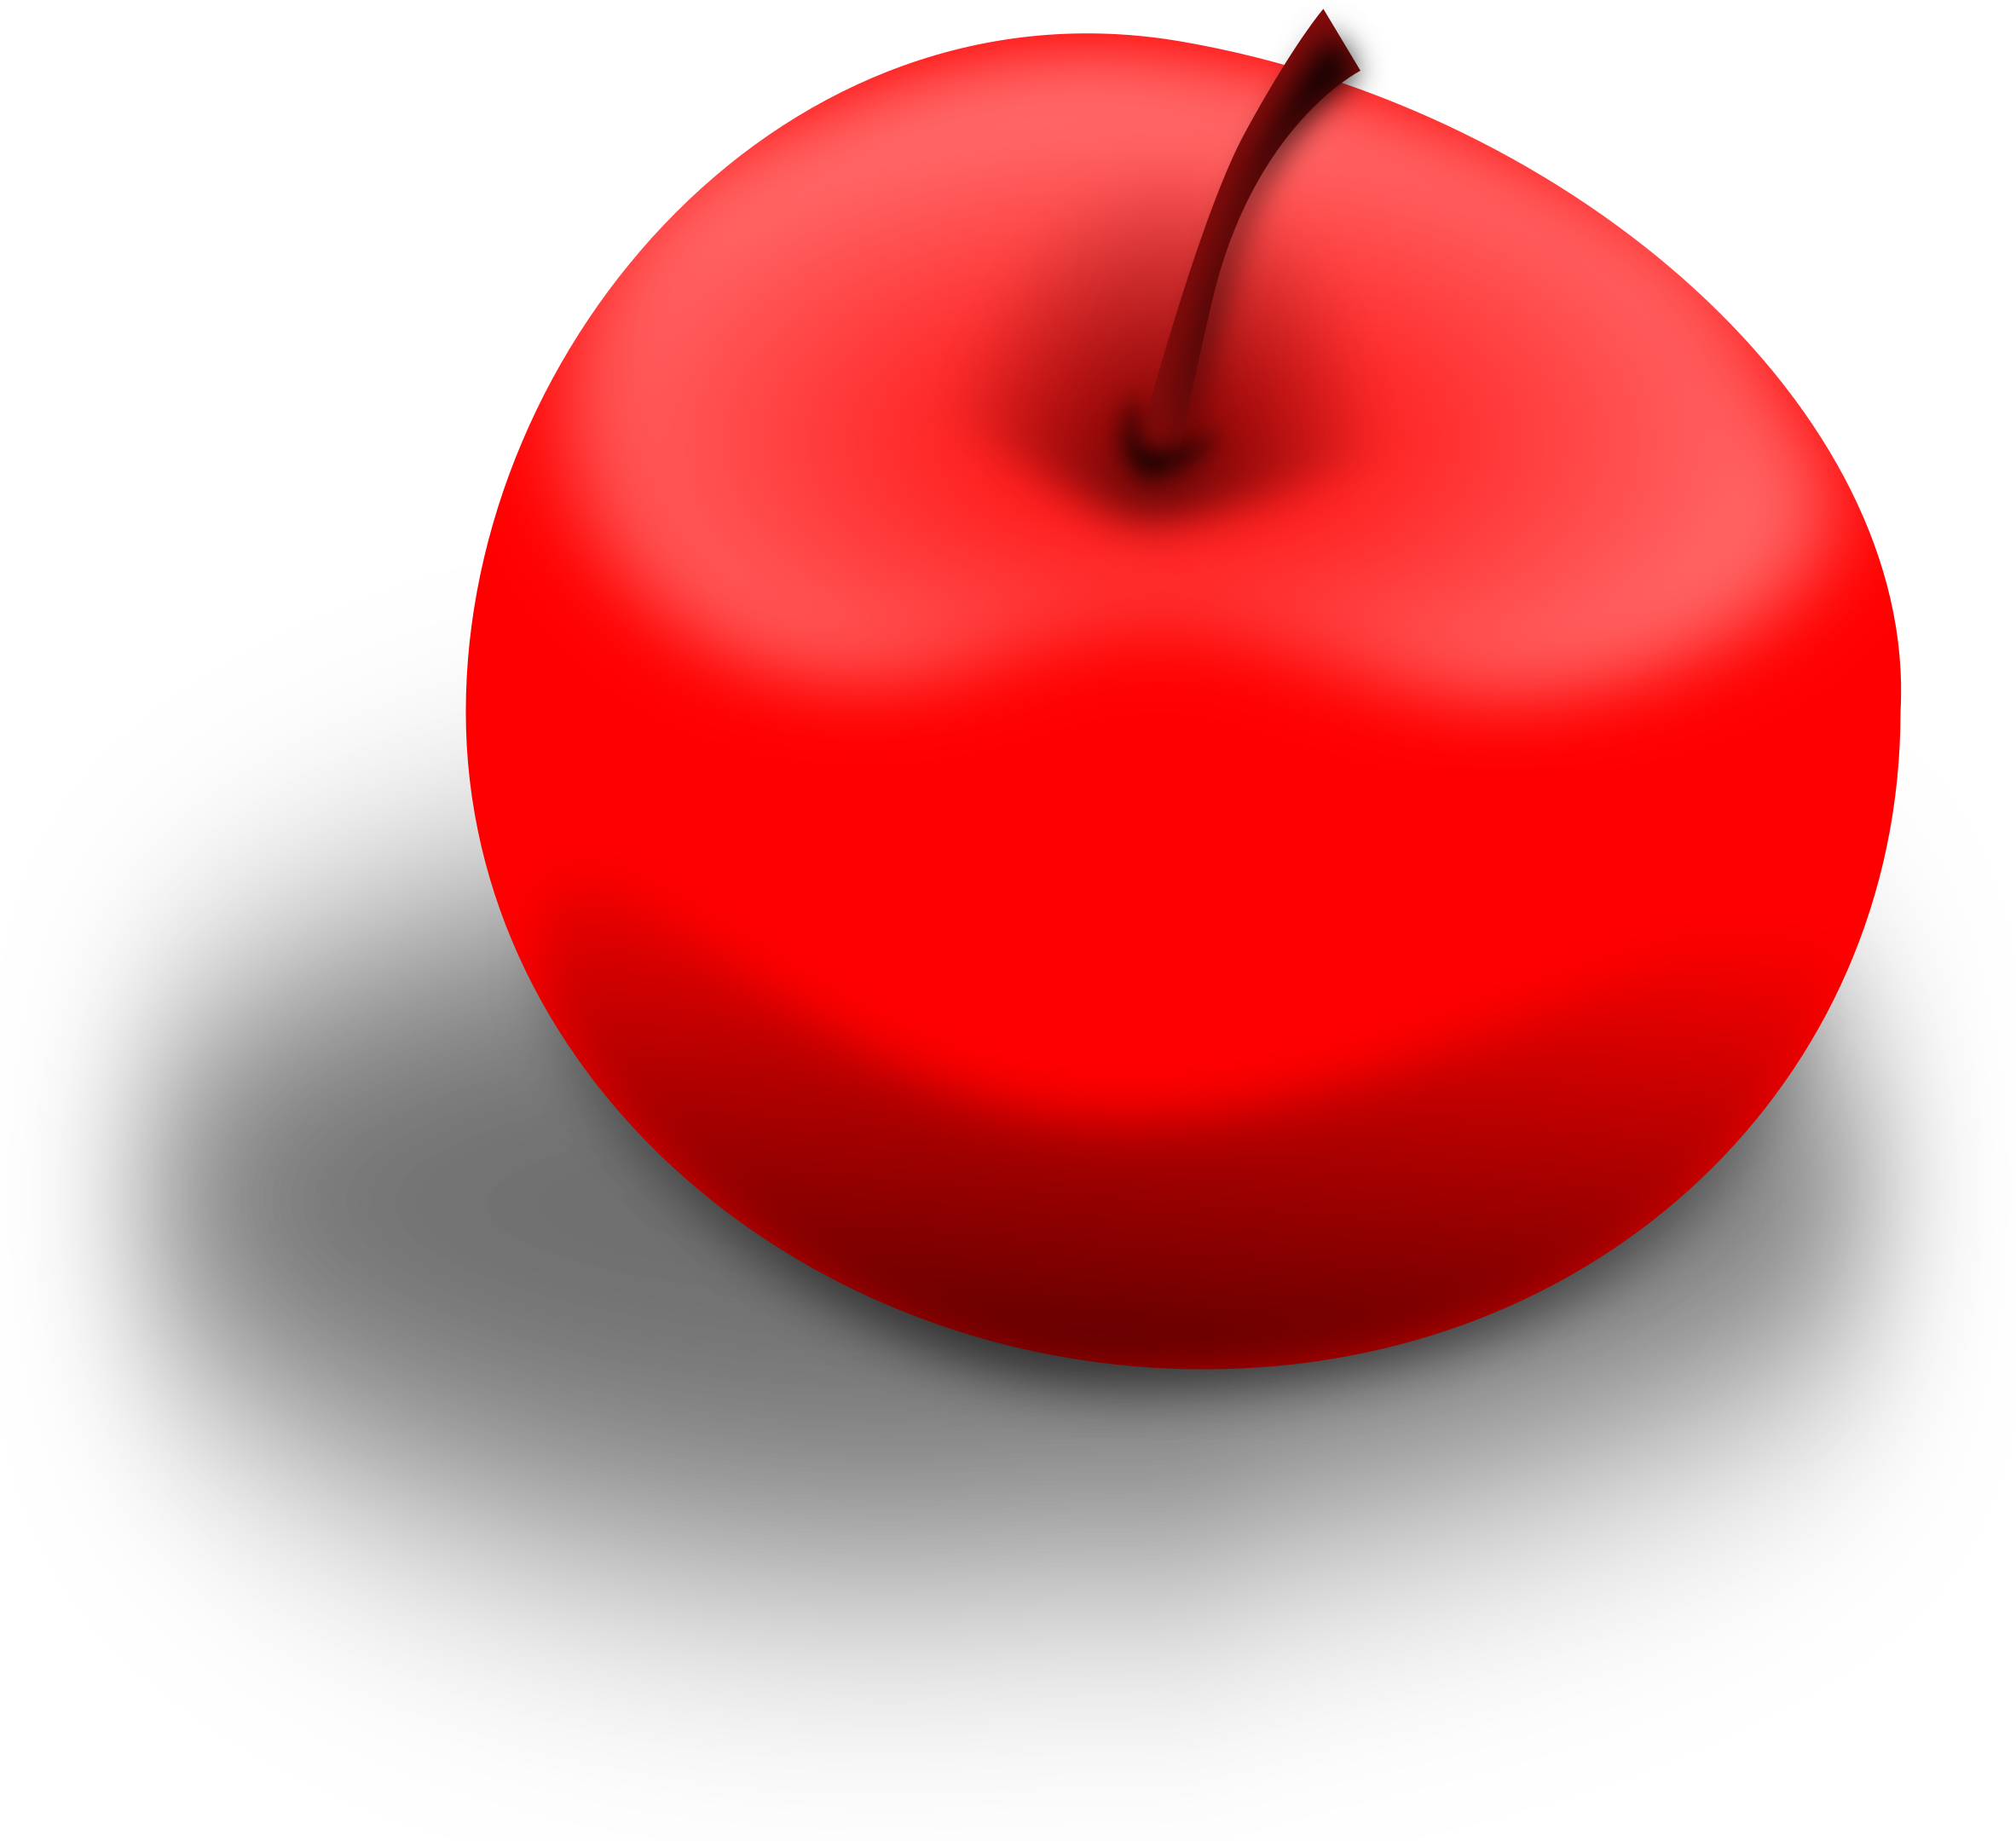 Apple Red - Red Apple (2400x2179)